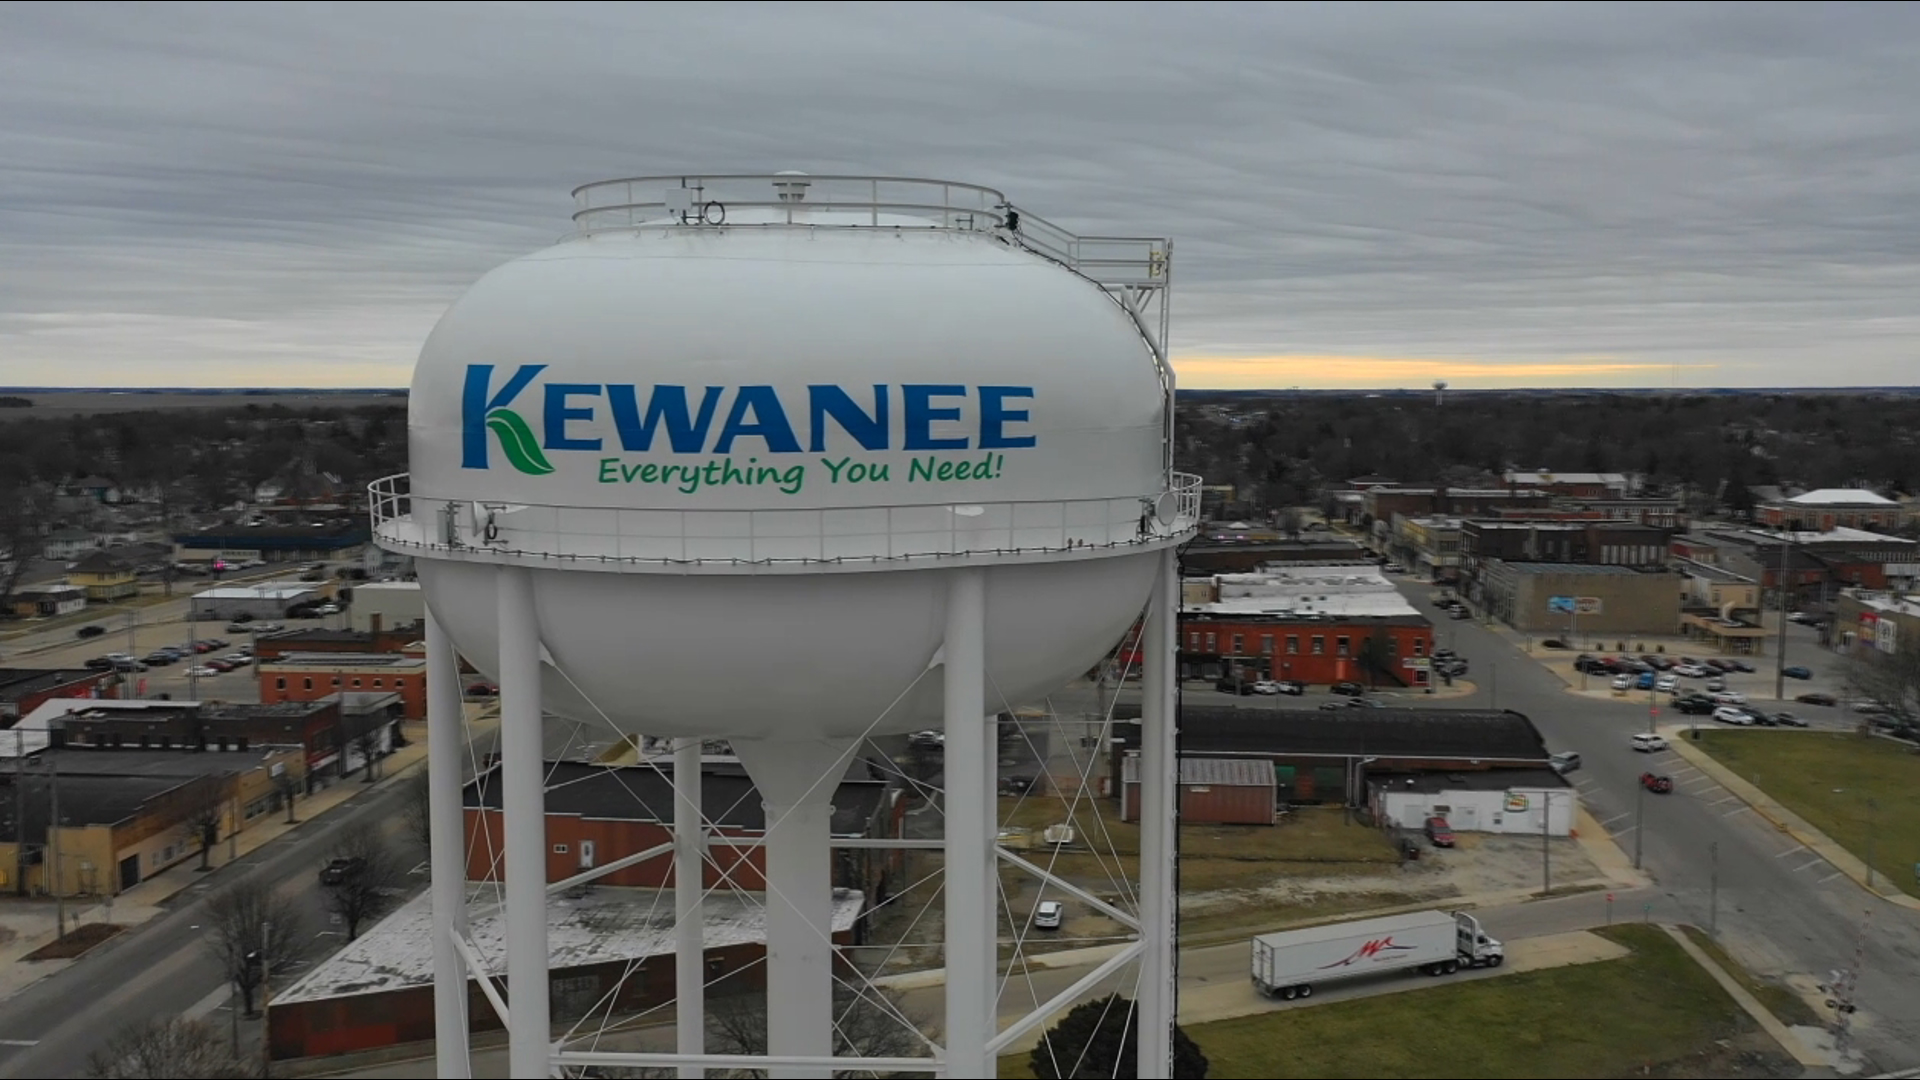 Enjoy views above downtown Kewanee and around town from our News 8 Drone.